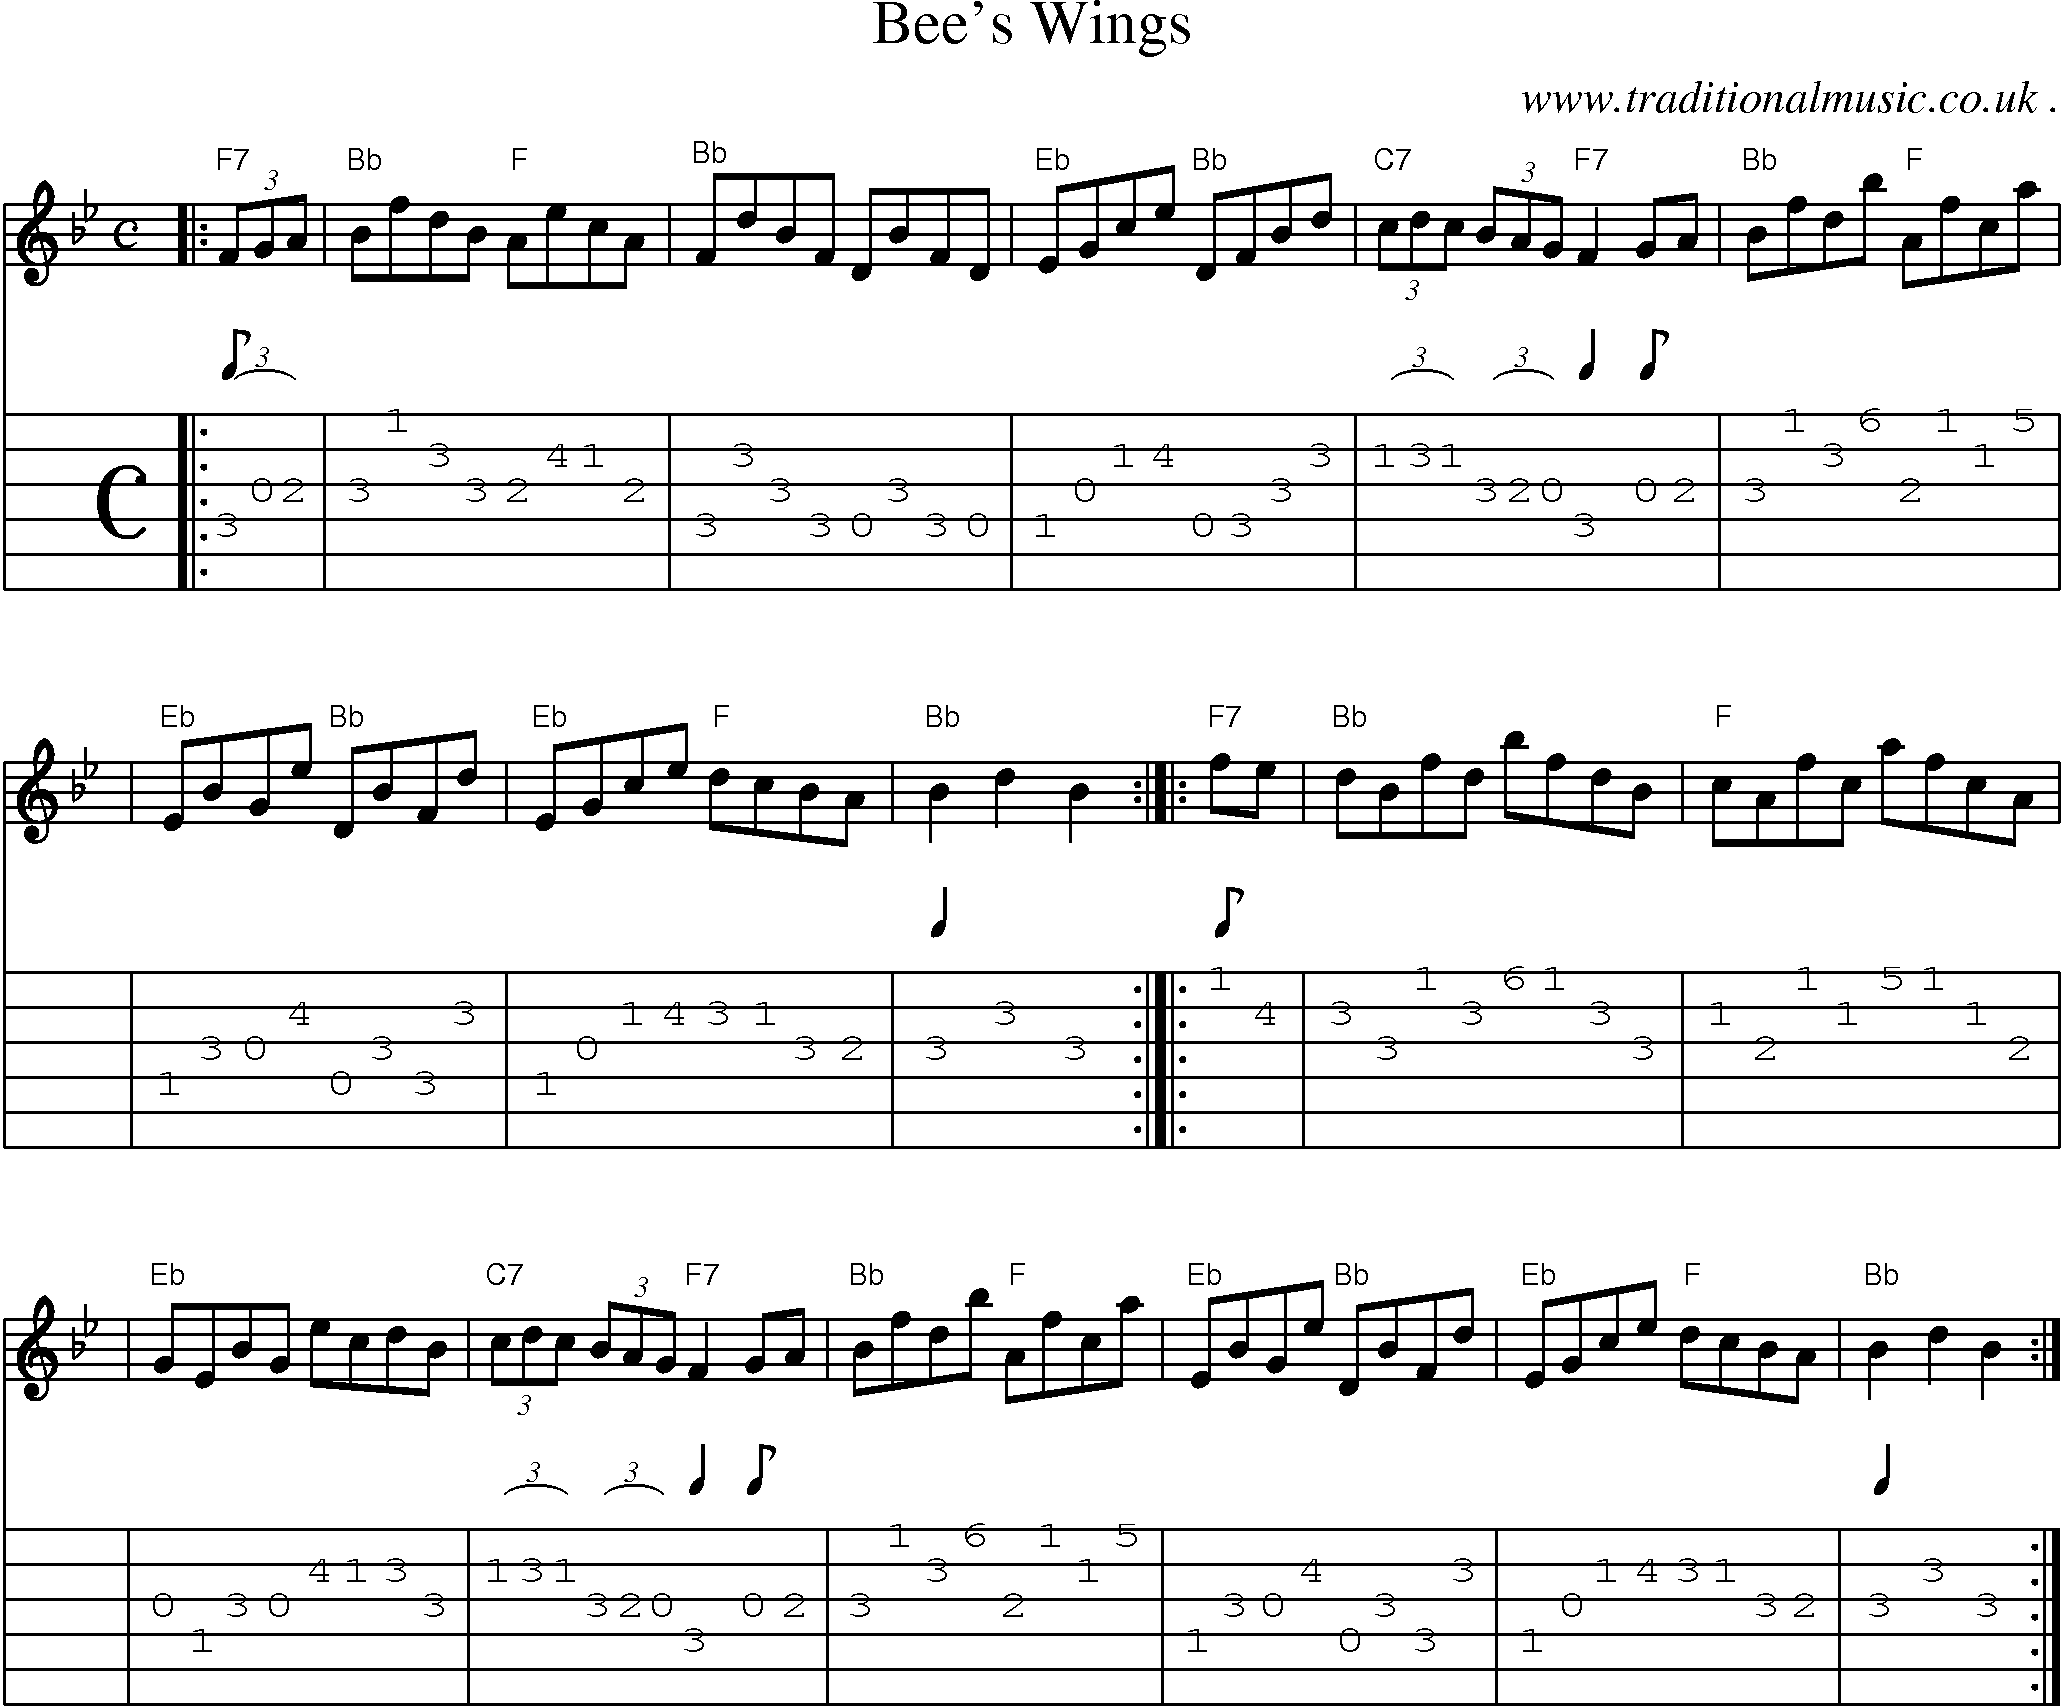 Sheet-music  score, Chords and Guitar Tabs for Bees Wings